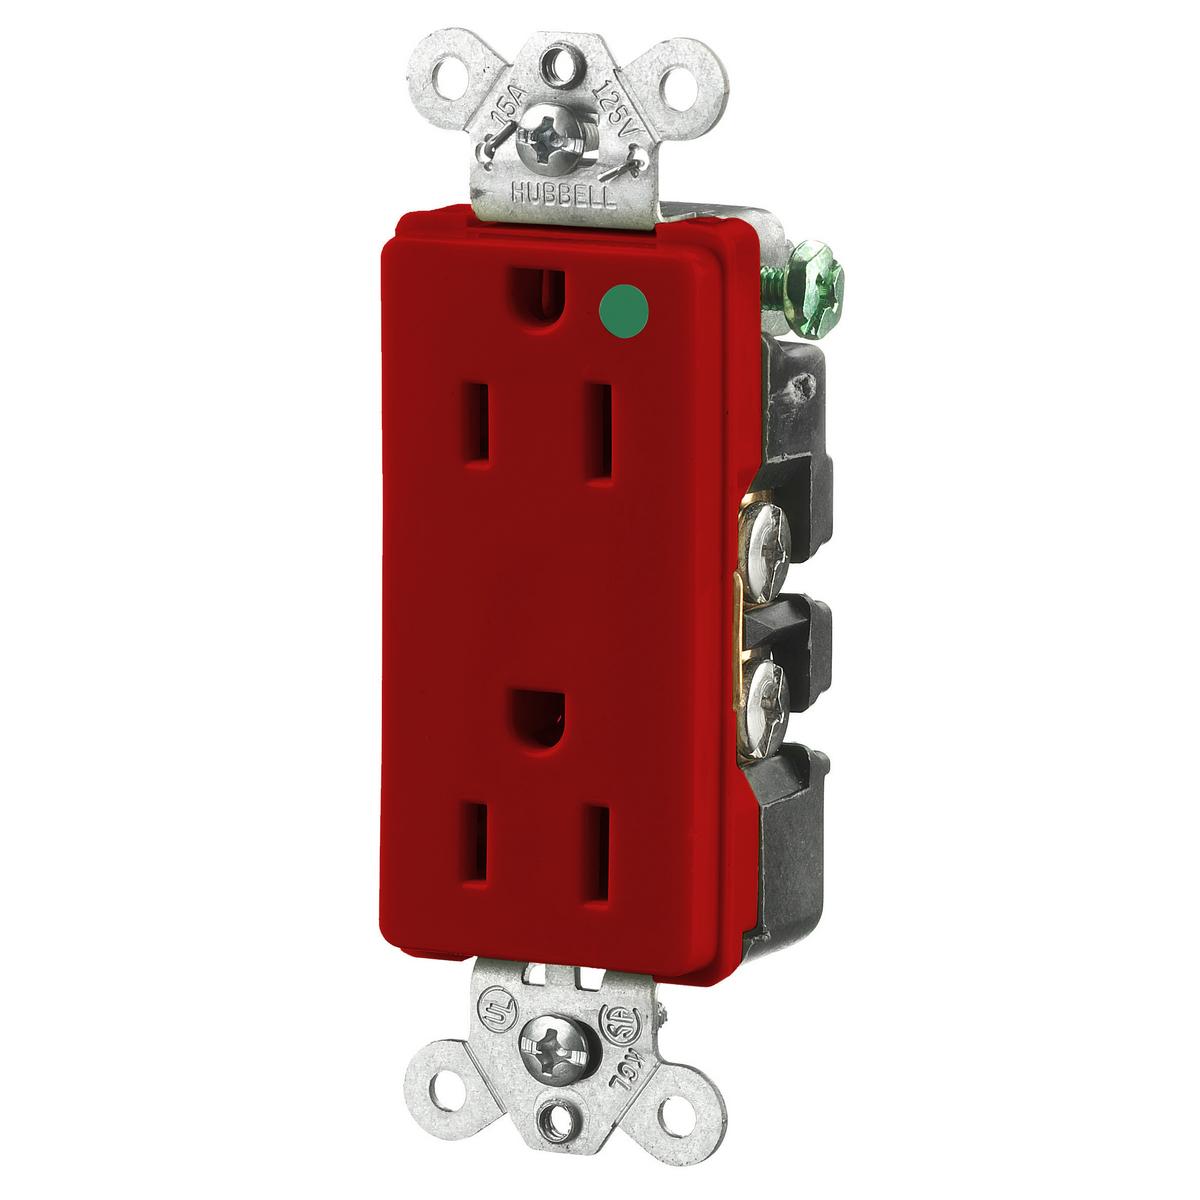 Hubbell HBL2172R Straight Blade Devices, Receptacles, Duplex, Hospital Grade, 2-Pole 3-Wire Grounding, 15A 125V, 5-15R, Red, Single Pack.  ; Aesthetic Style Line� decorator design ; High impact resistant face ; Triple wipe contacts ; Standard, Self Grounding